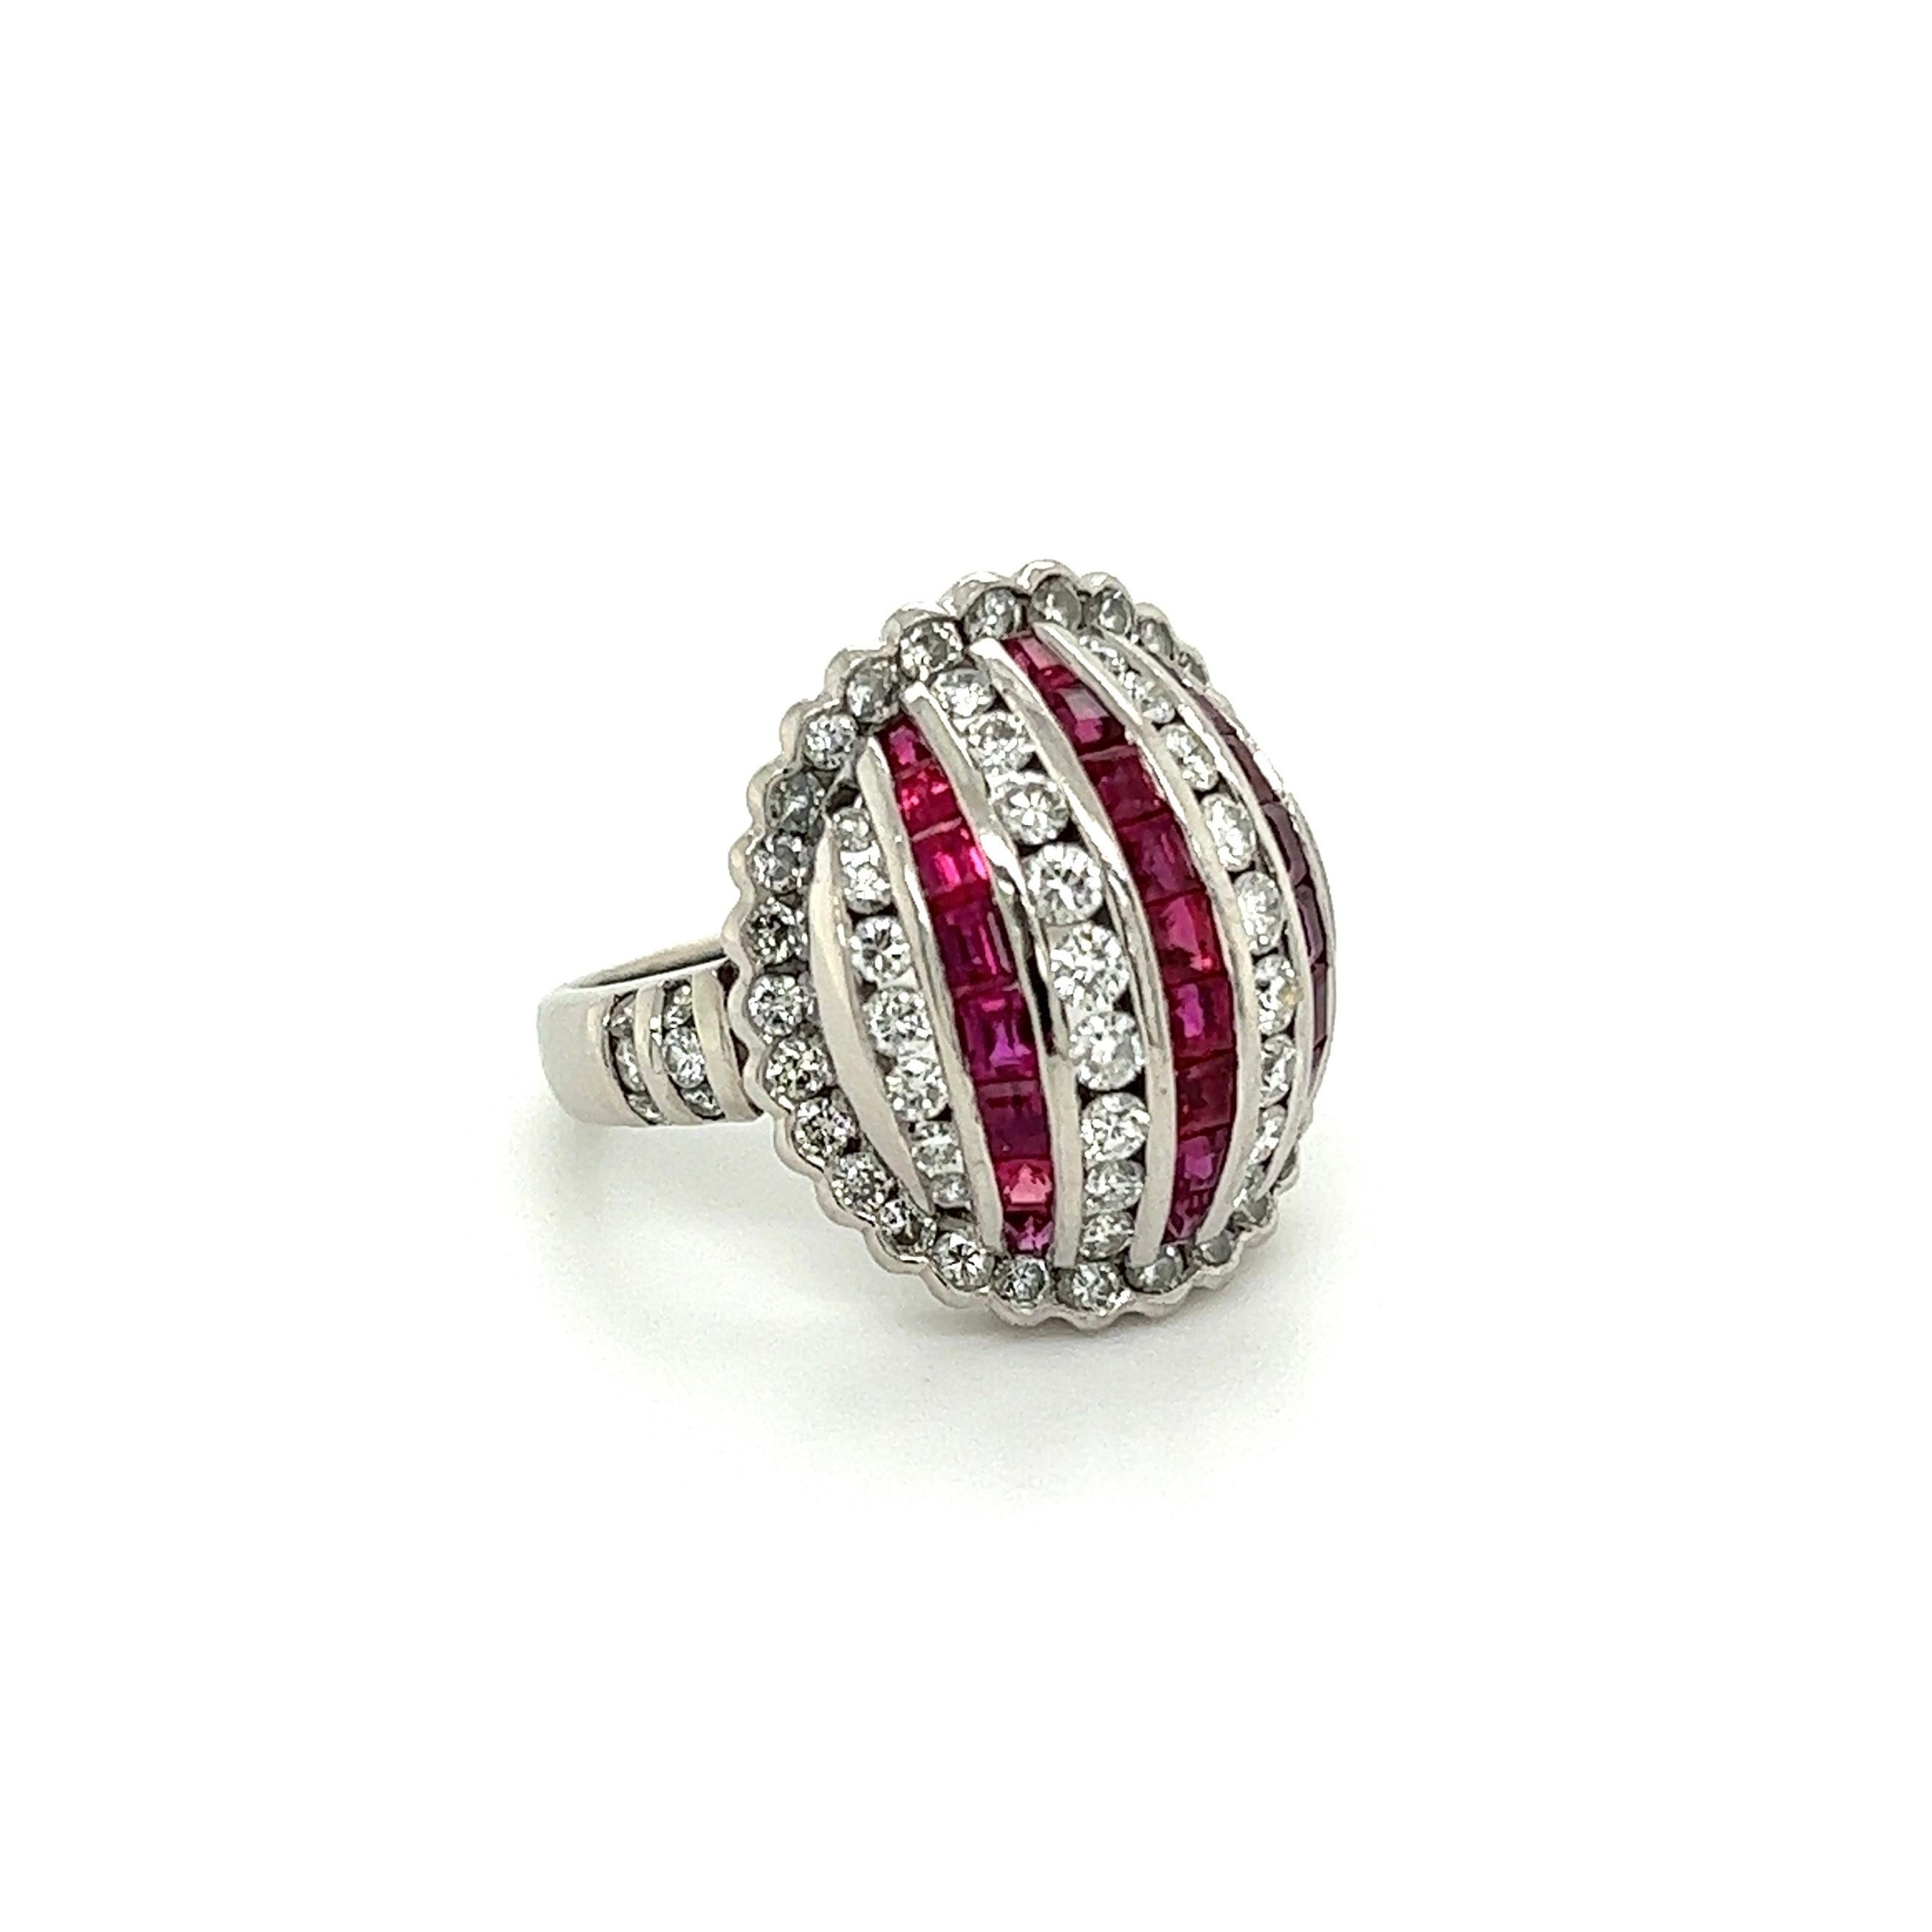 Simply Beautiful! Pave Diamond and Ruby Dome Band Ring. Securely Hand set with alternating rows and surround of Diamonds, weighing approx. 1.26tcw and Rubies. Approx. 1.47tcw. Hand crafted Platinum mounting. Measuring approx. 10.96” l x 0.79” w x